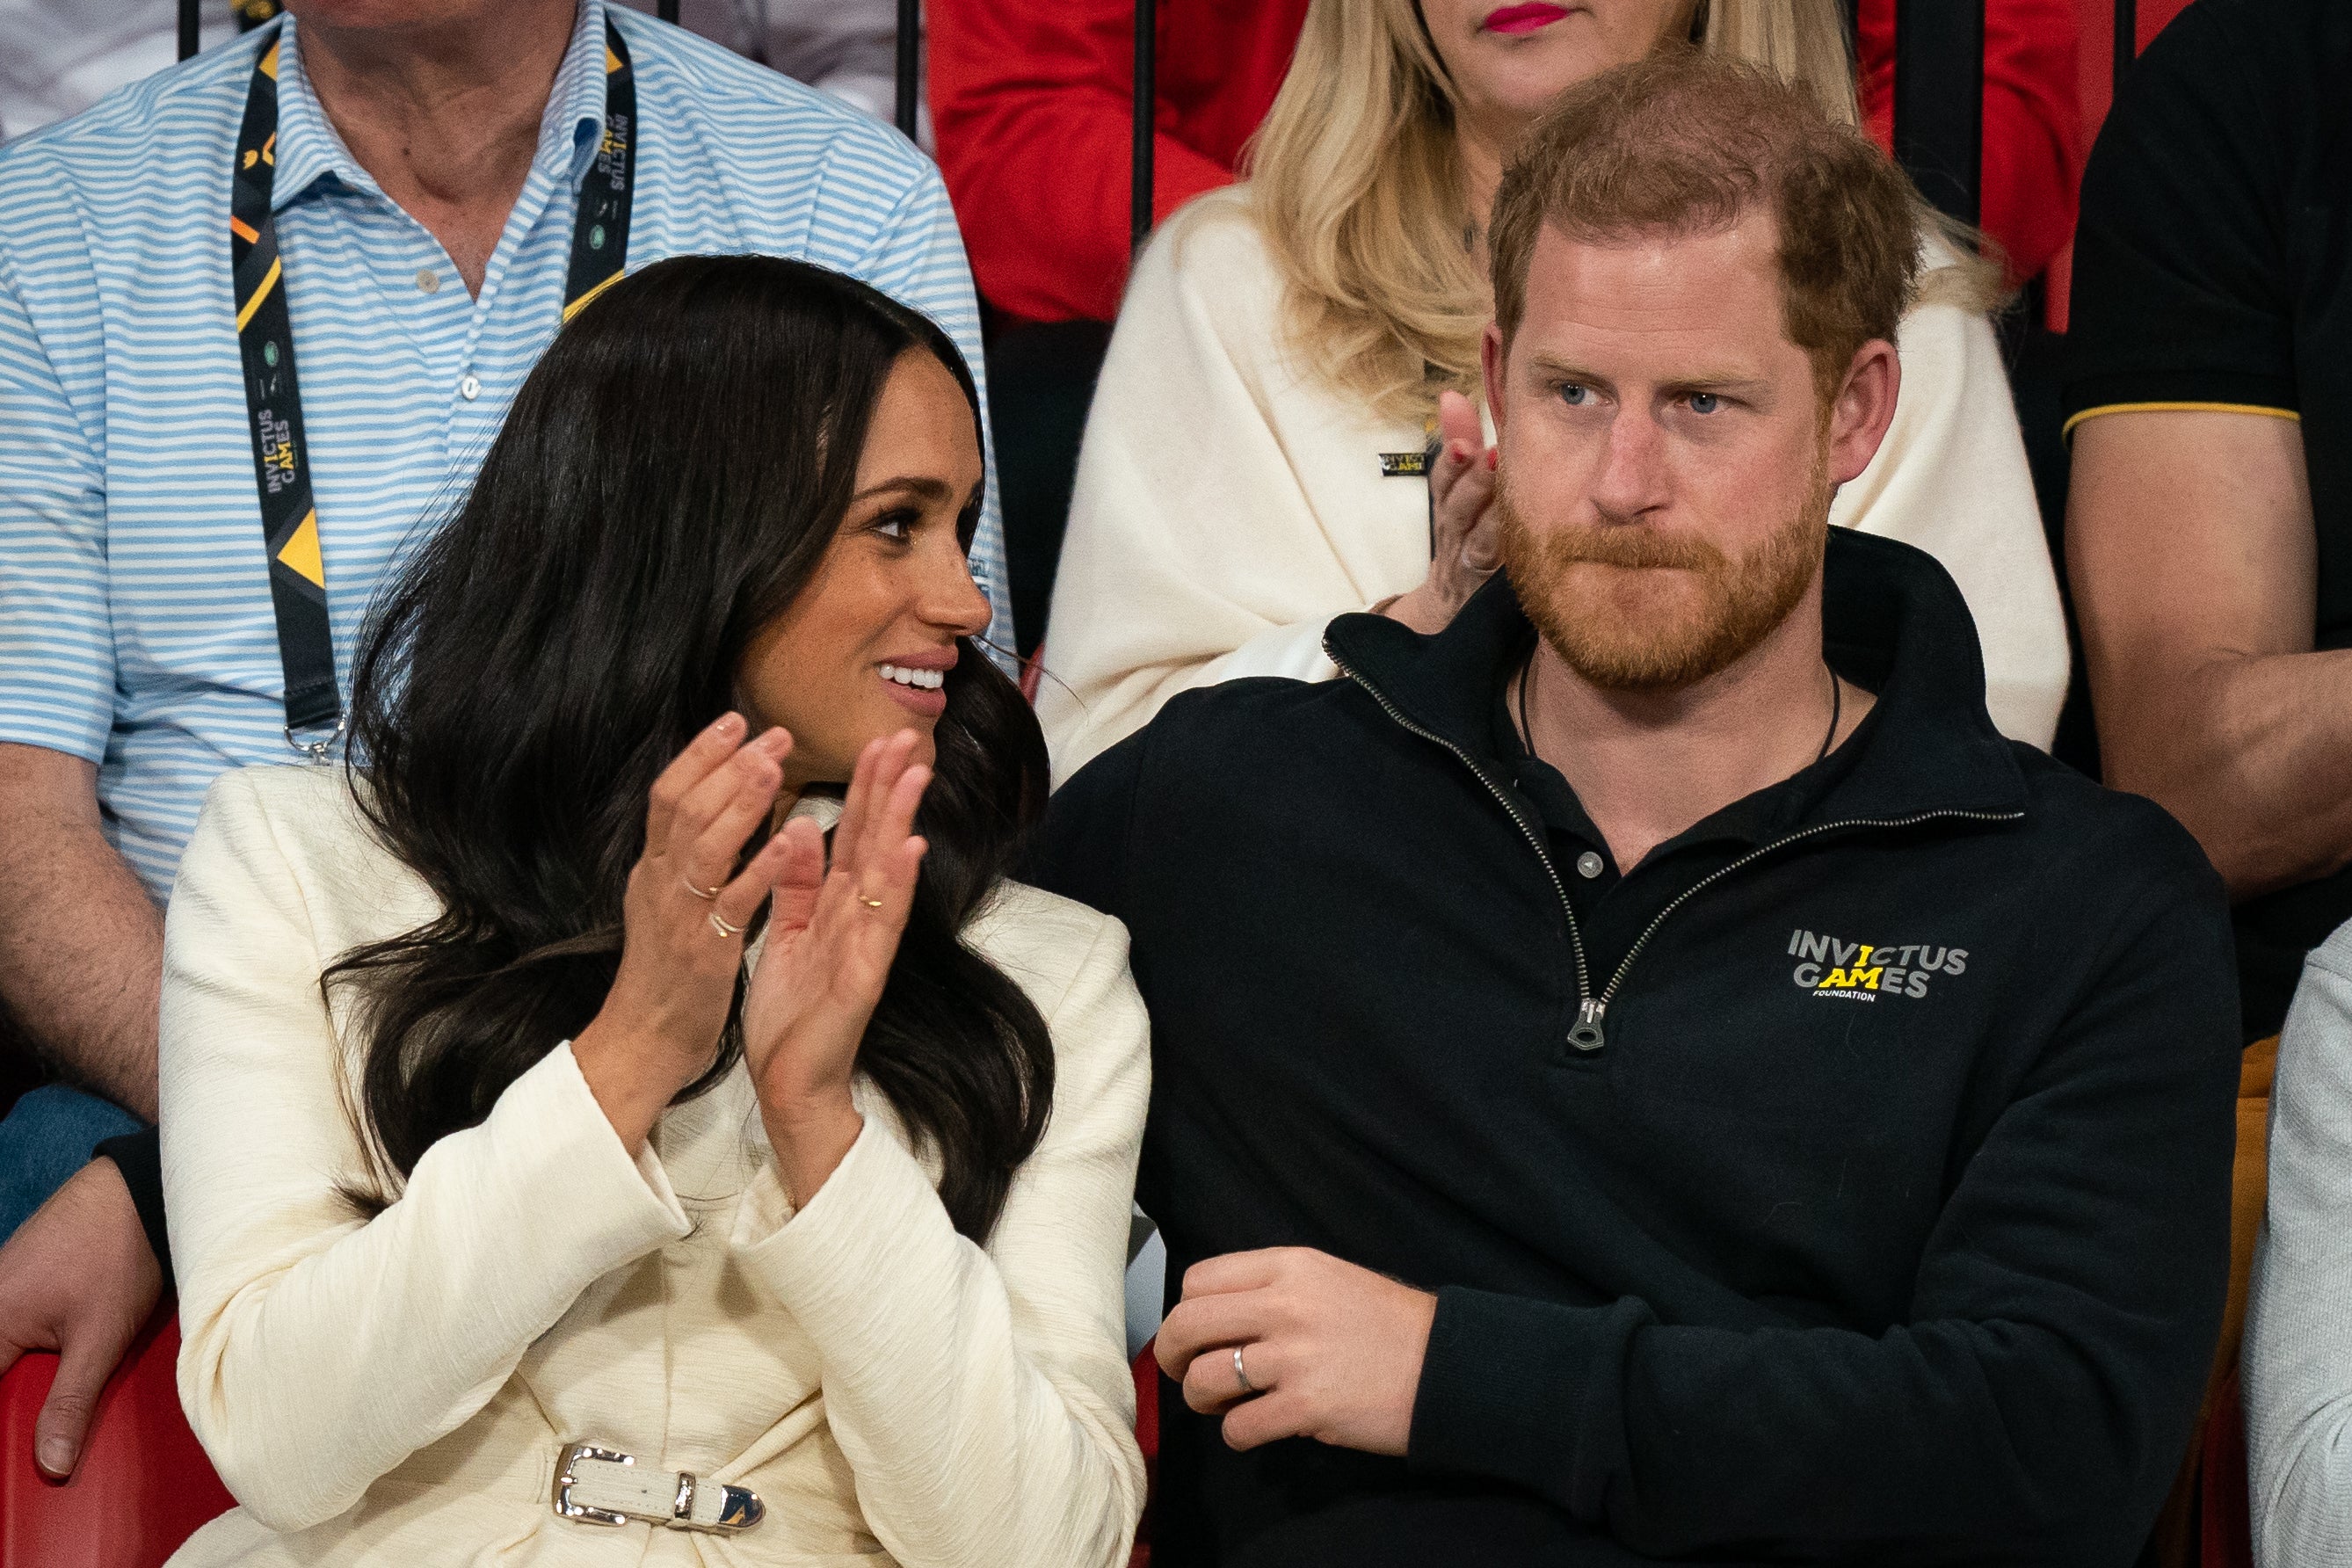 The Duke and Duchess of Sussex attending the Invictus Games sitting volleyball event in the Invictus Games Stadium, at Zuiderpark the Hague, Netherlands (Aaron Chown/PA)